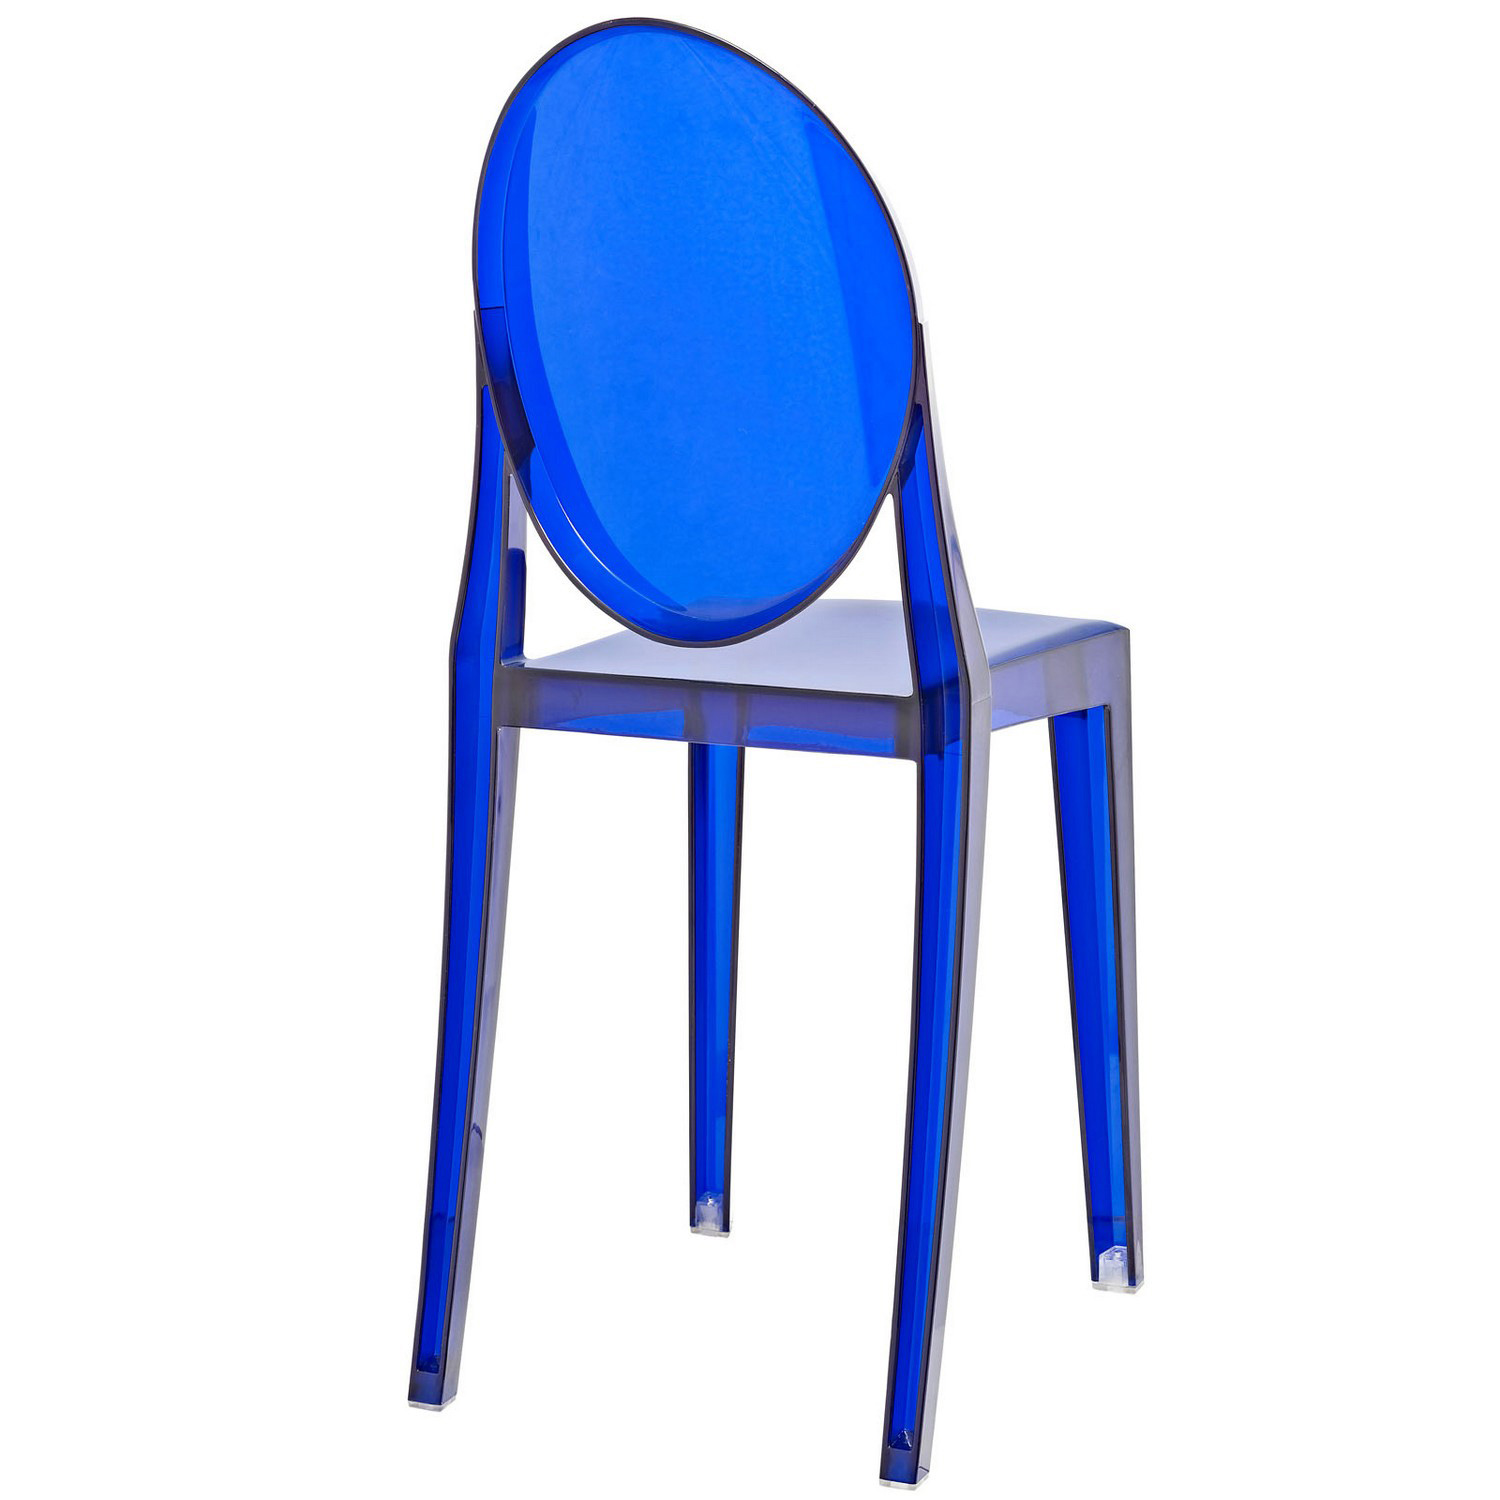 Modway Casper Dining Chairs Set of 2 - Blue